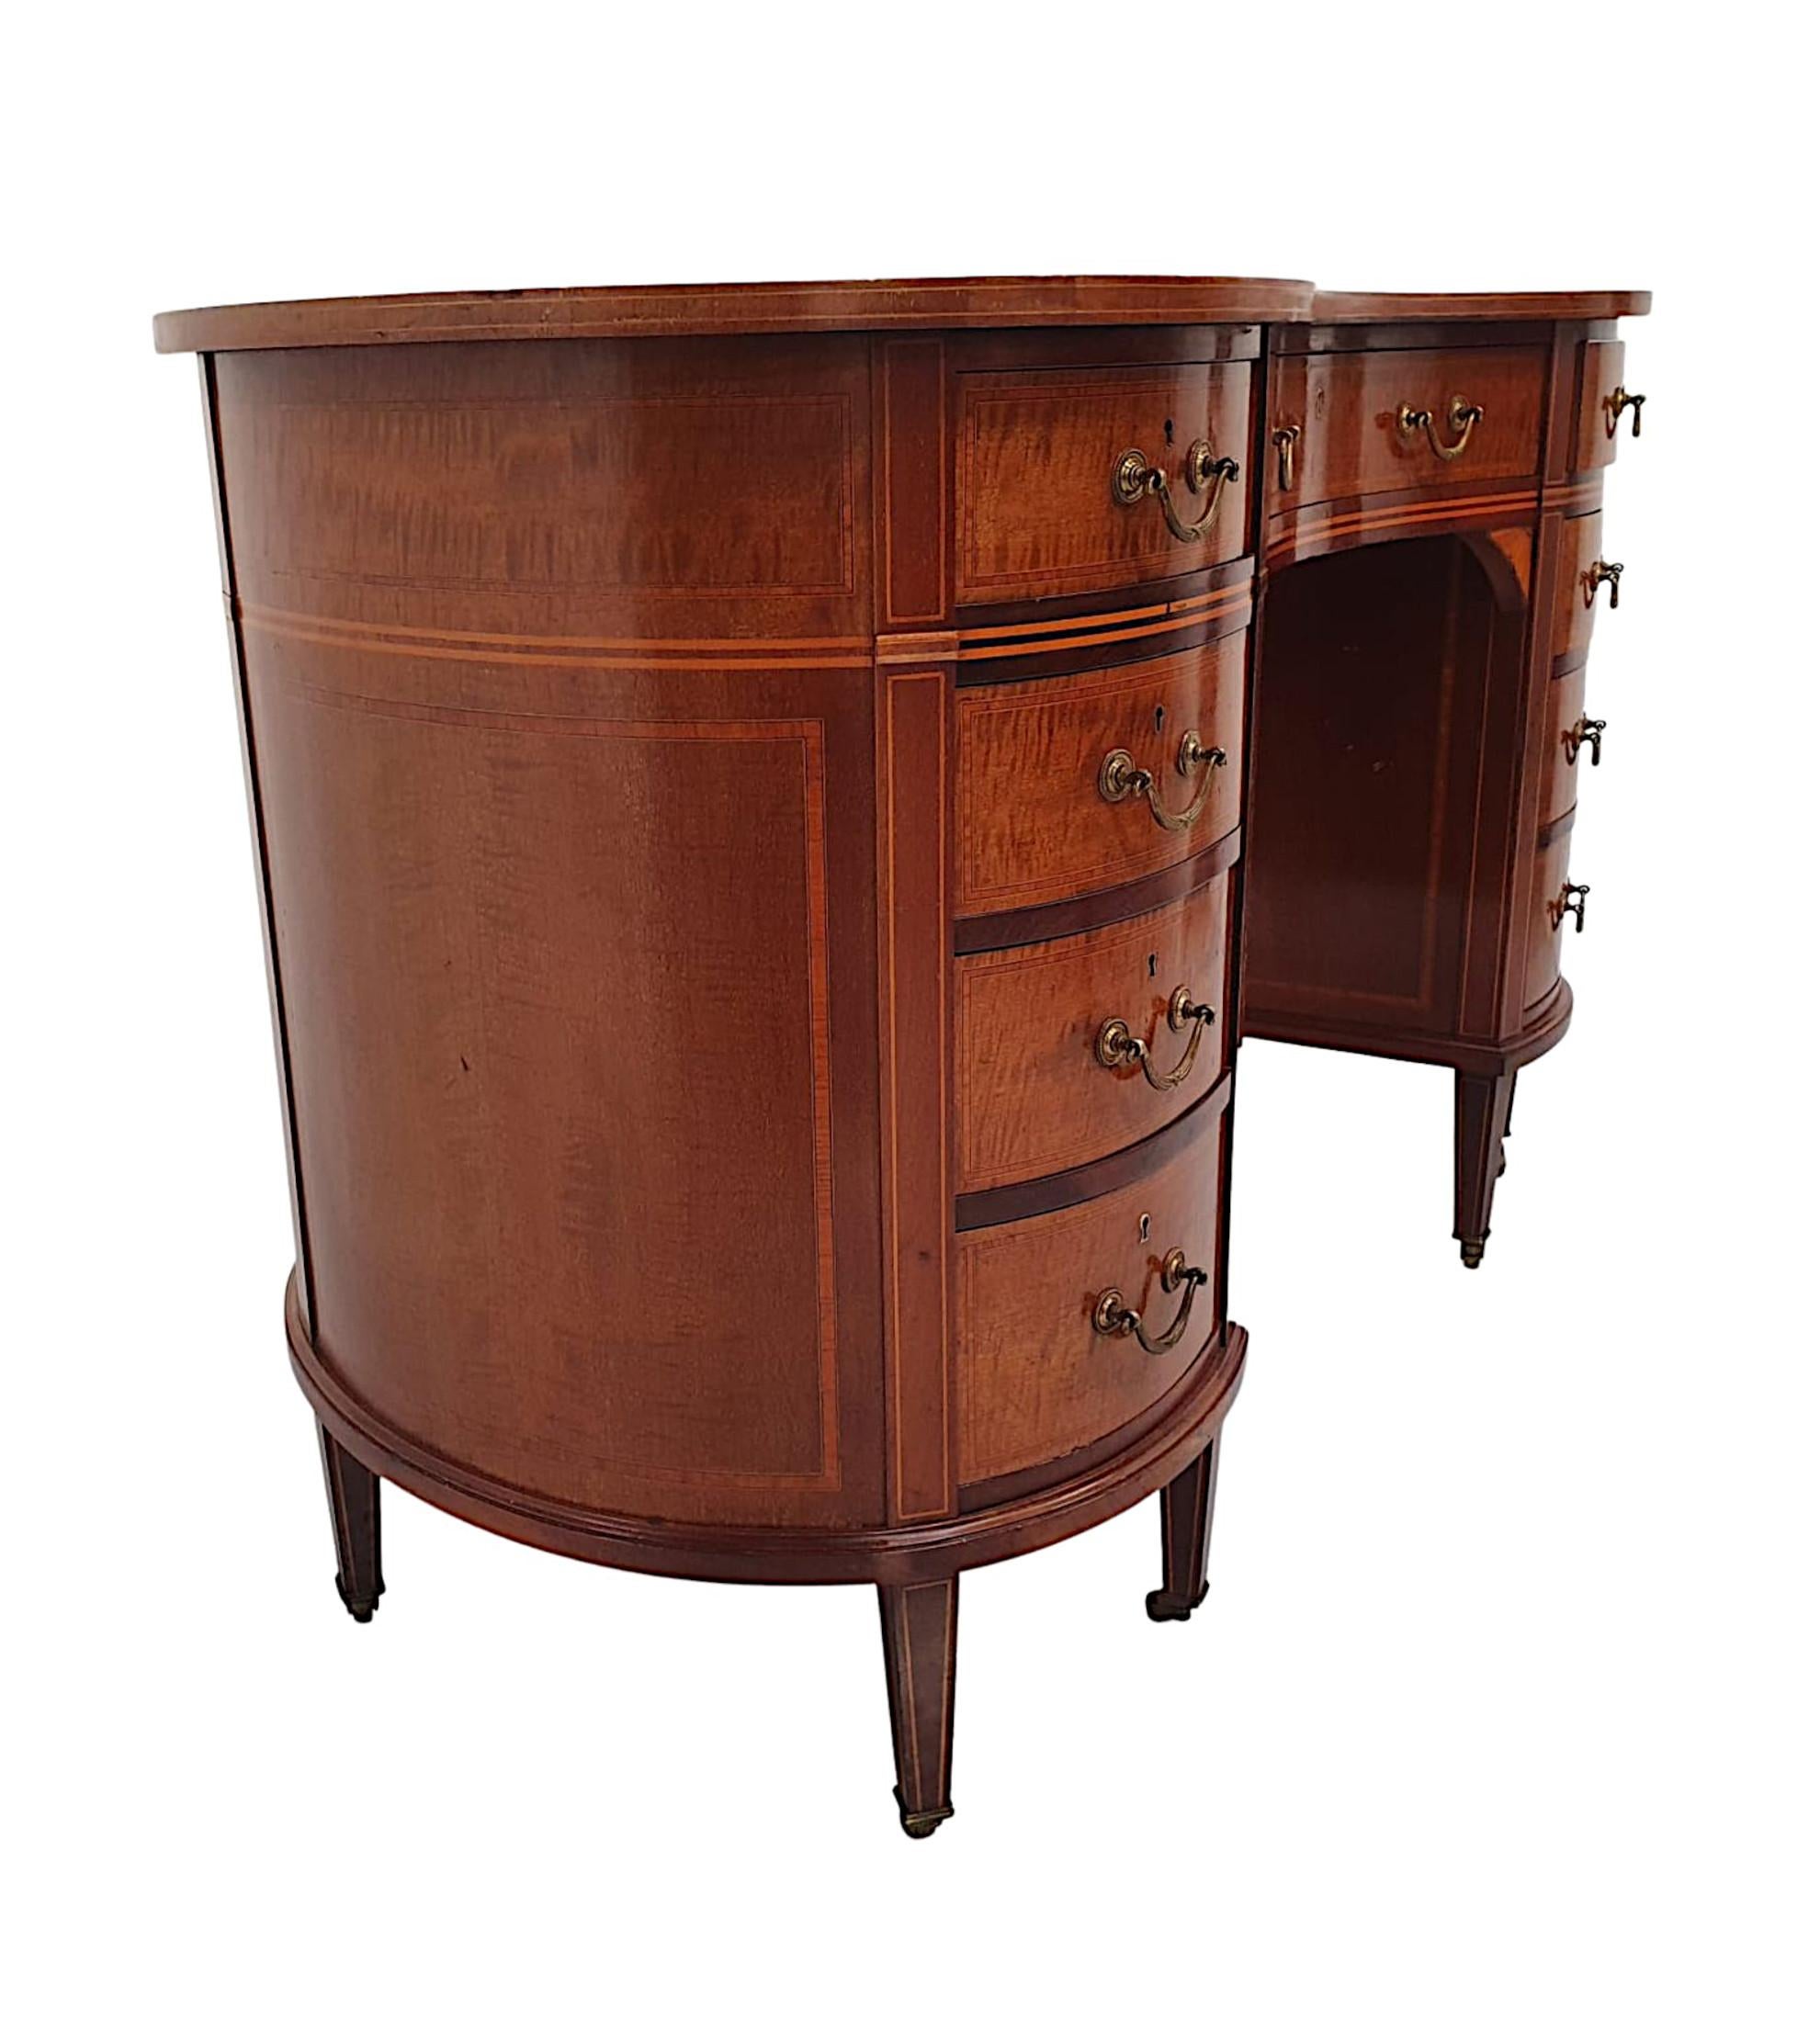 A very fine Edwardian mahogany leather top nine drawer kidney shaped desk, of stunning quality, finely carved, line inlaid and crossbanded throughout.  The moulded desk top is fitted with a gorgeous green tooled leather writing skiver surface above